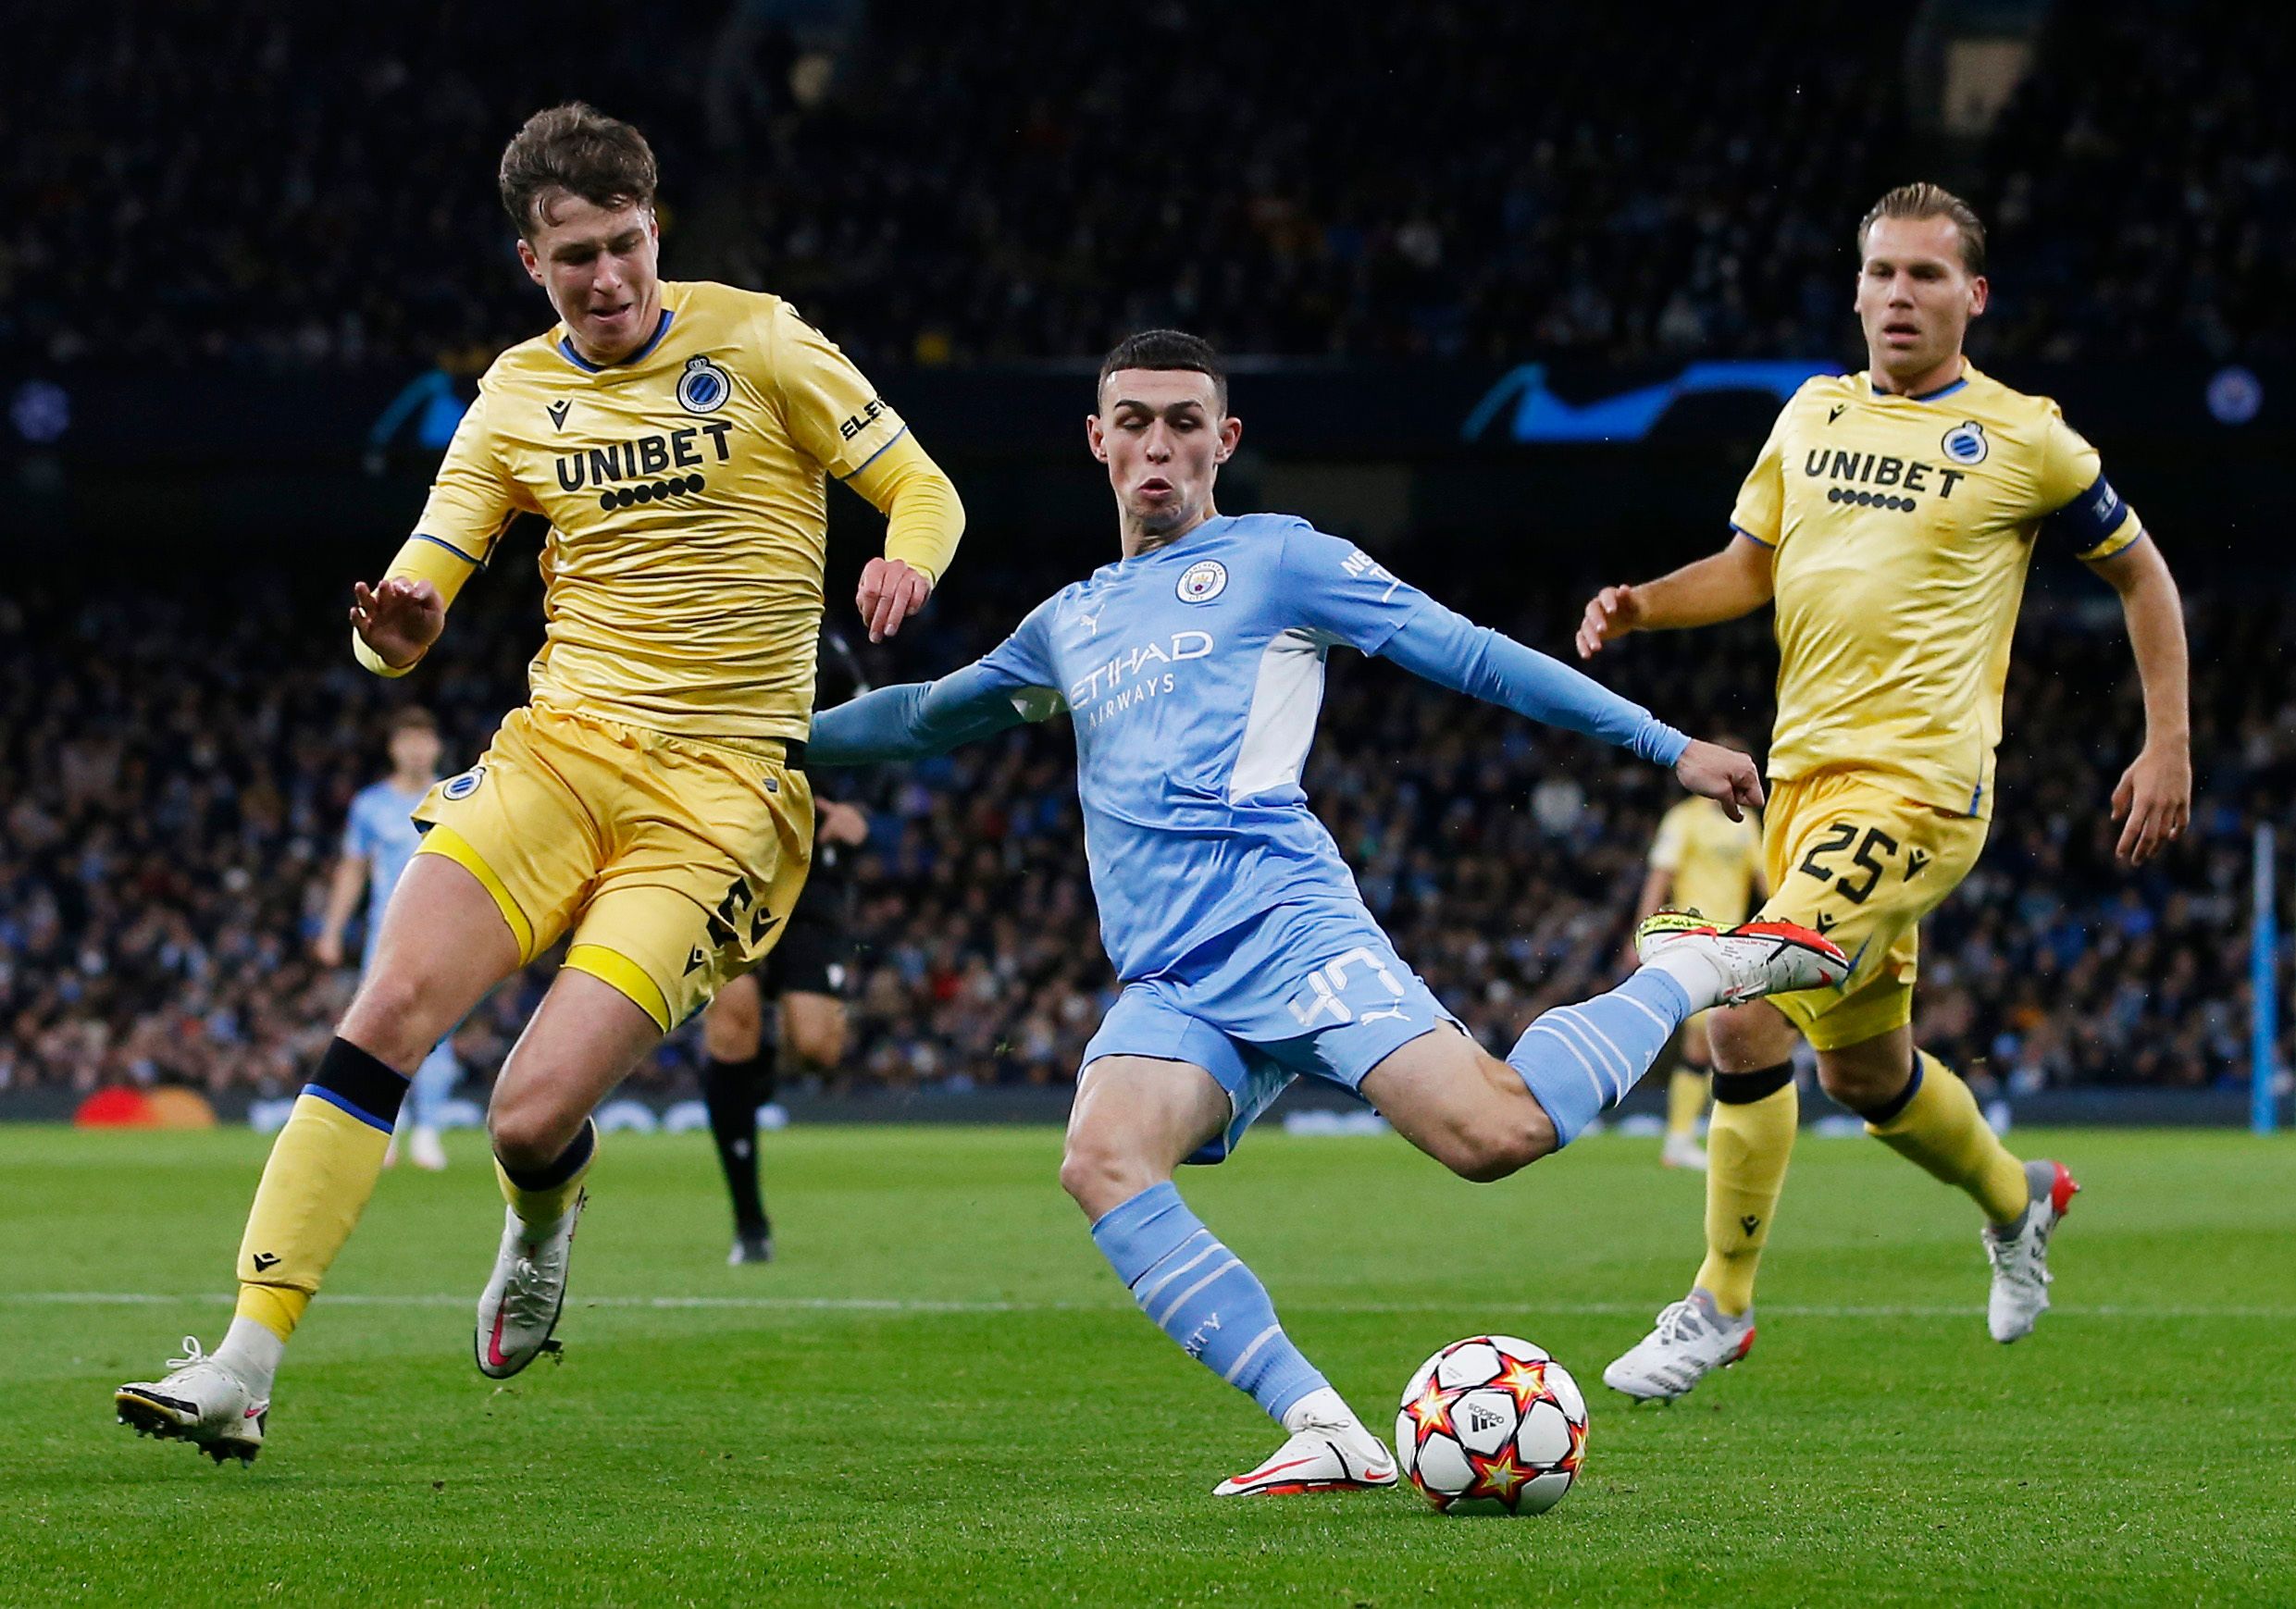 Soccer Football - Champions League - Group A - Manchester City v Club Brugge - Etihad Stadium, Manchester, Britain - November 3, 2021 Manchester City's Phil Foden in action with Club Brugge's Jack Hendry and Ruud Vormer REUTERS/Craig Brough